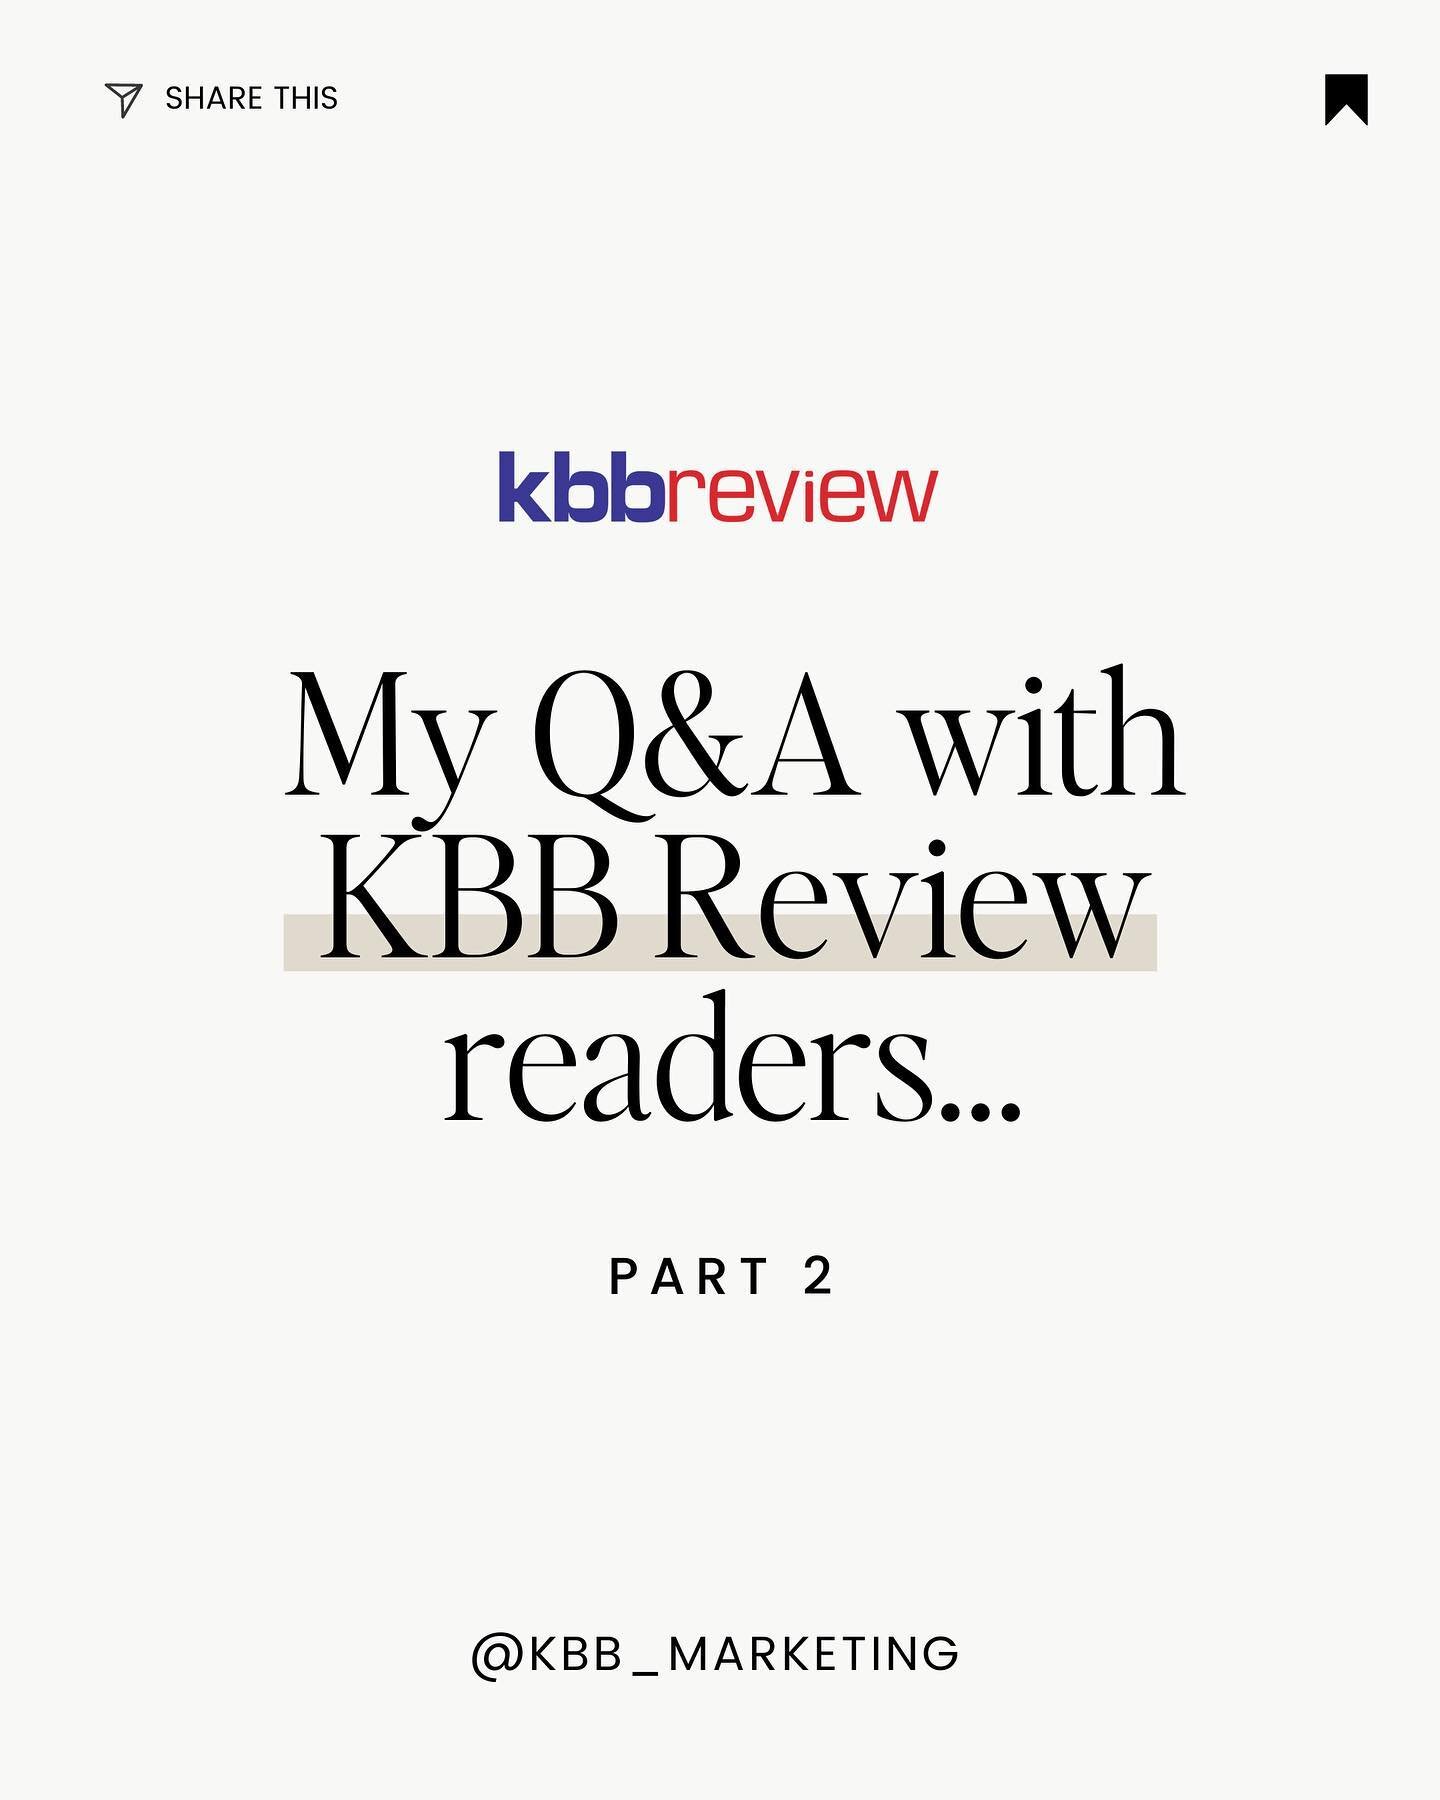 Many of you will have received your @kbbreview copies over the weekend ✉️ 

On p.21 you&rsquo;ll find my Q&amp;A (part 2)!

I&rsquo;ll post the link in my stories to a version you can actually read 😁

If this is useful, you might want to sign up to 